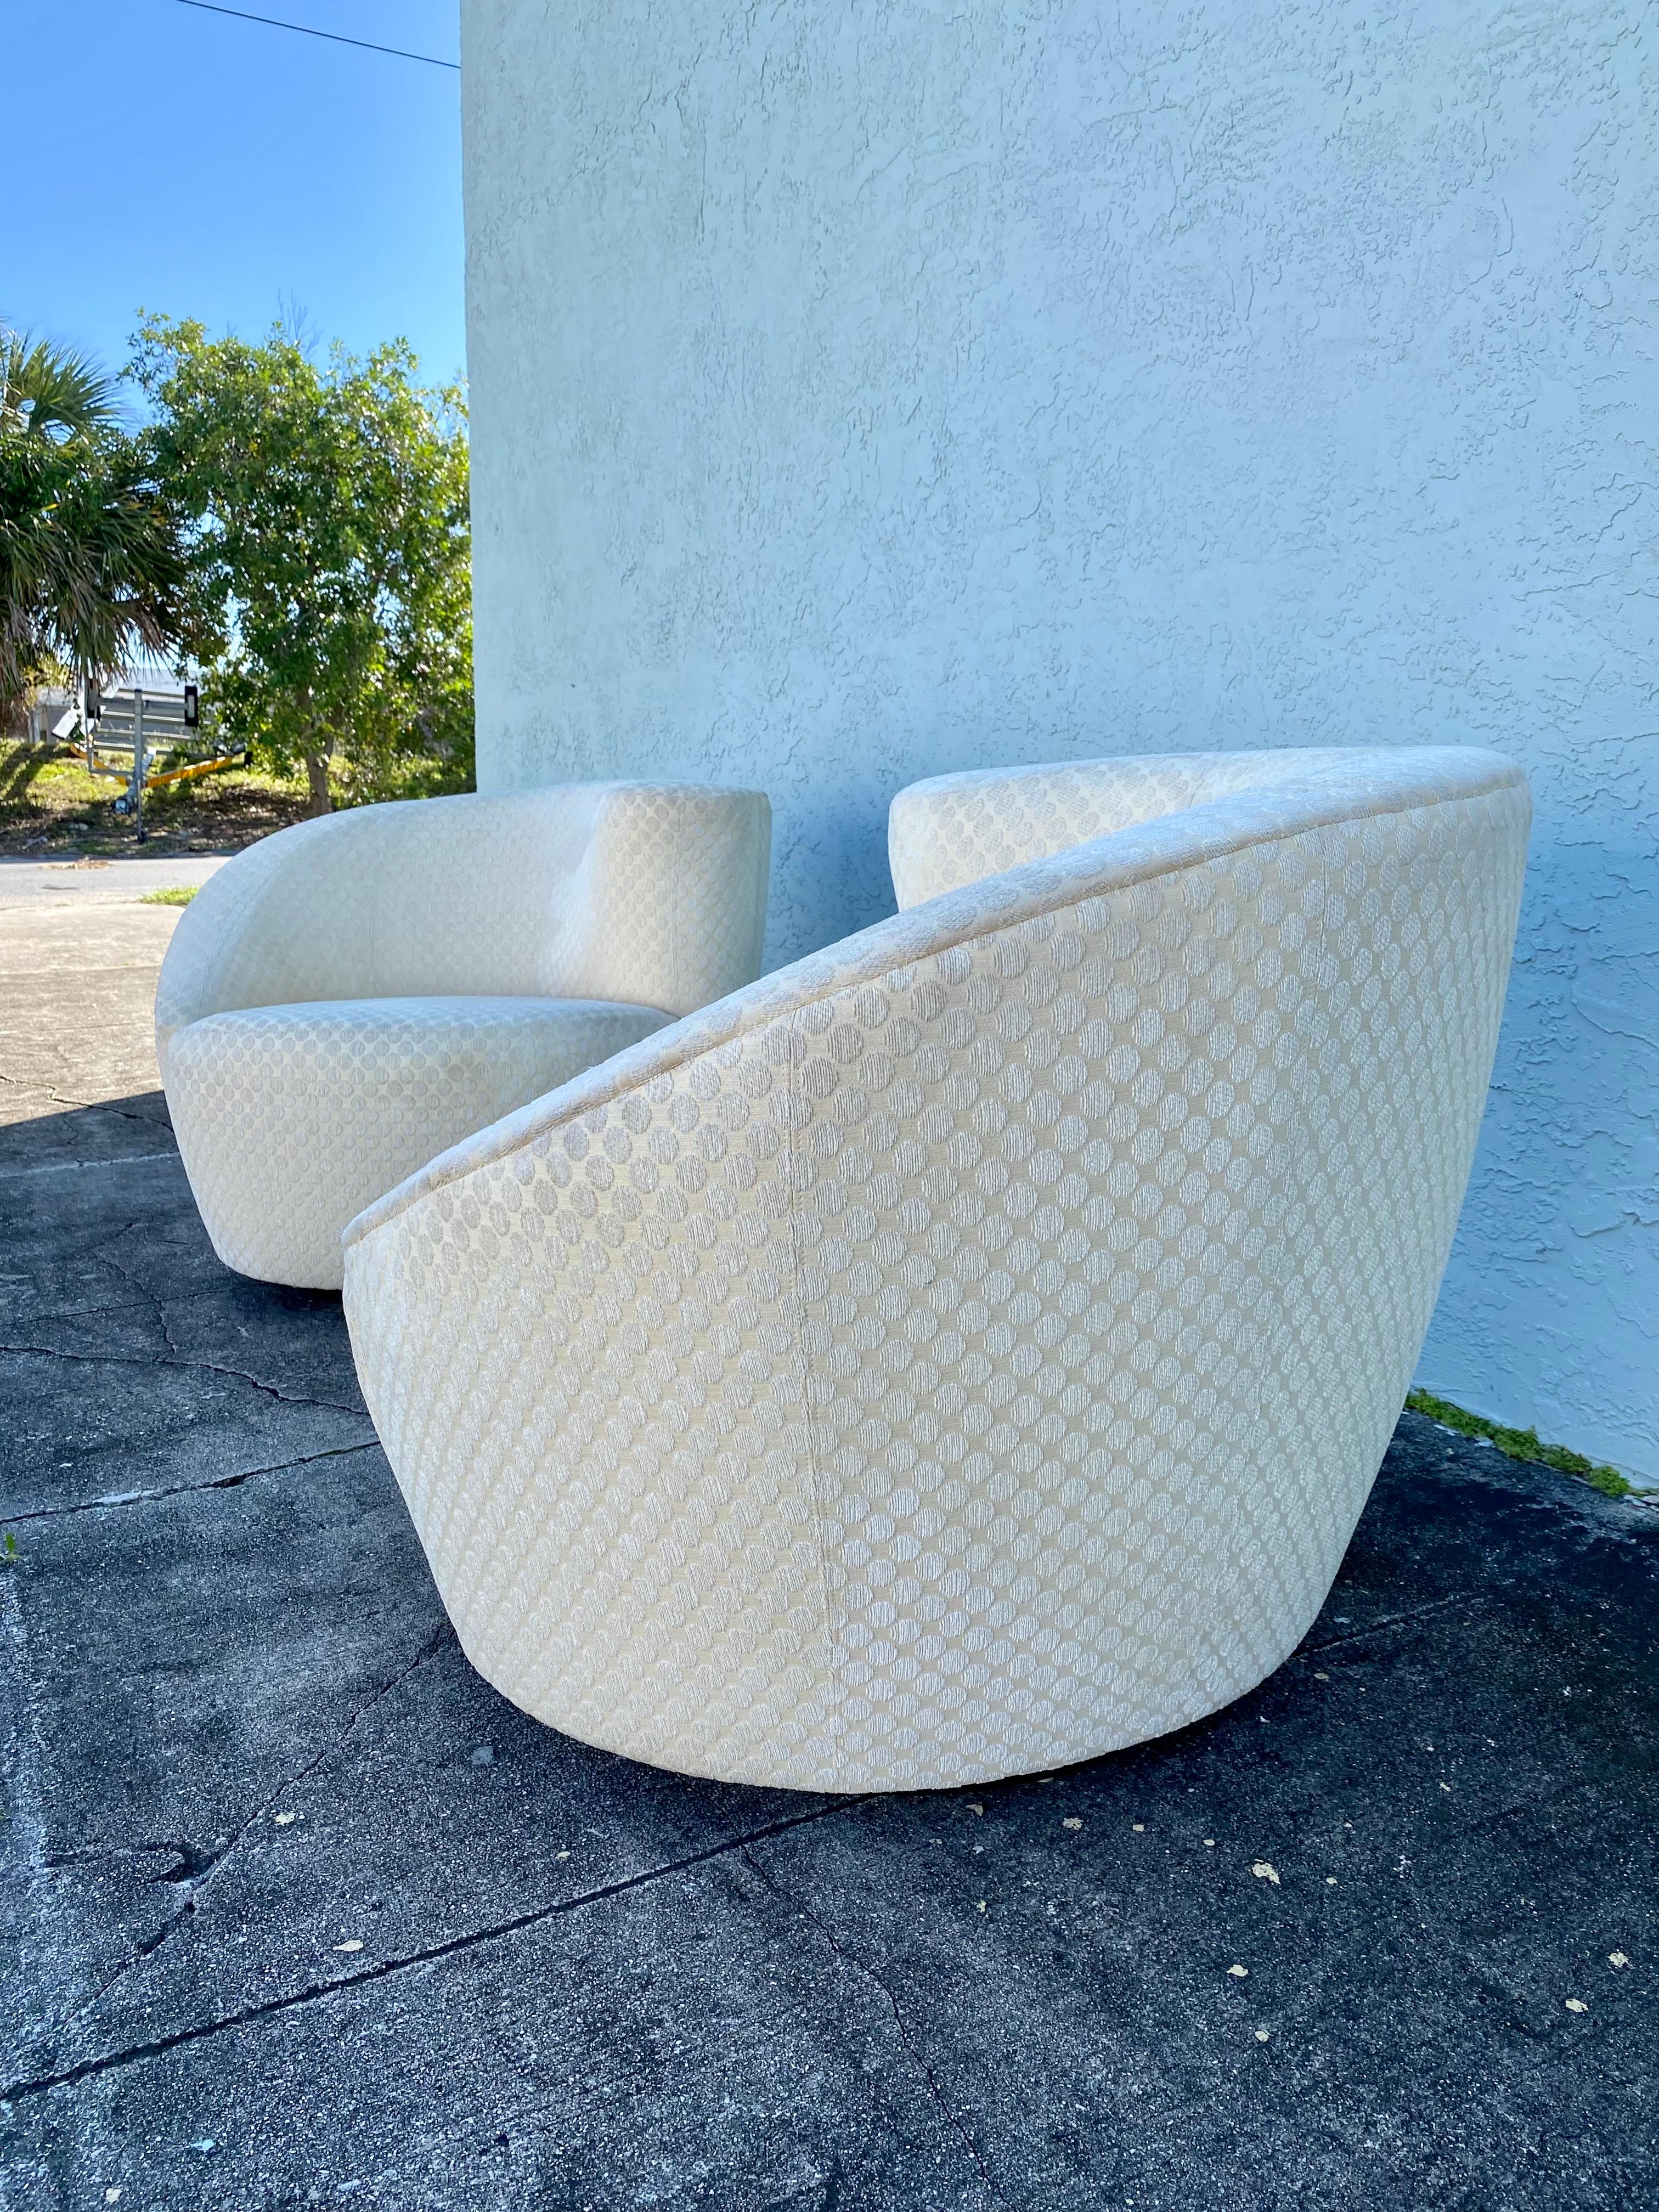 Upholstery 1980s Directional Cream Polka Dots Swivel Chairs, Set of 2 For Sale